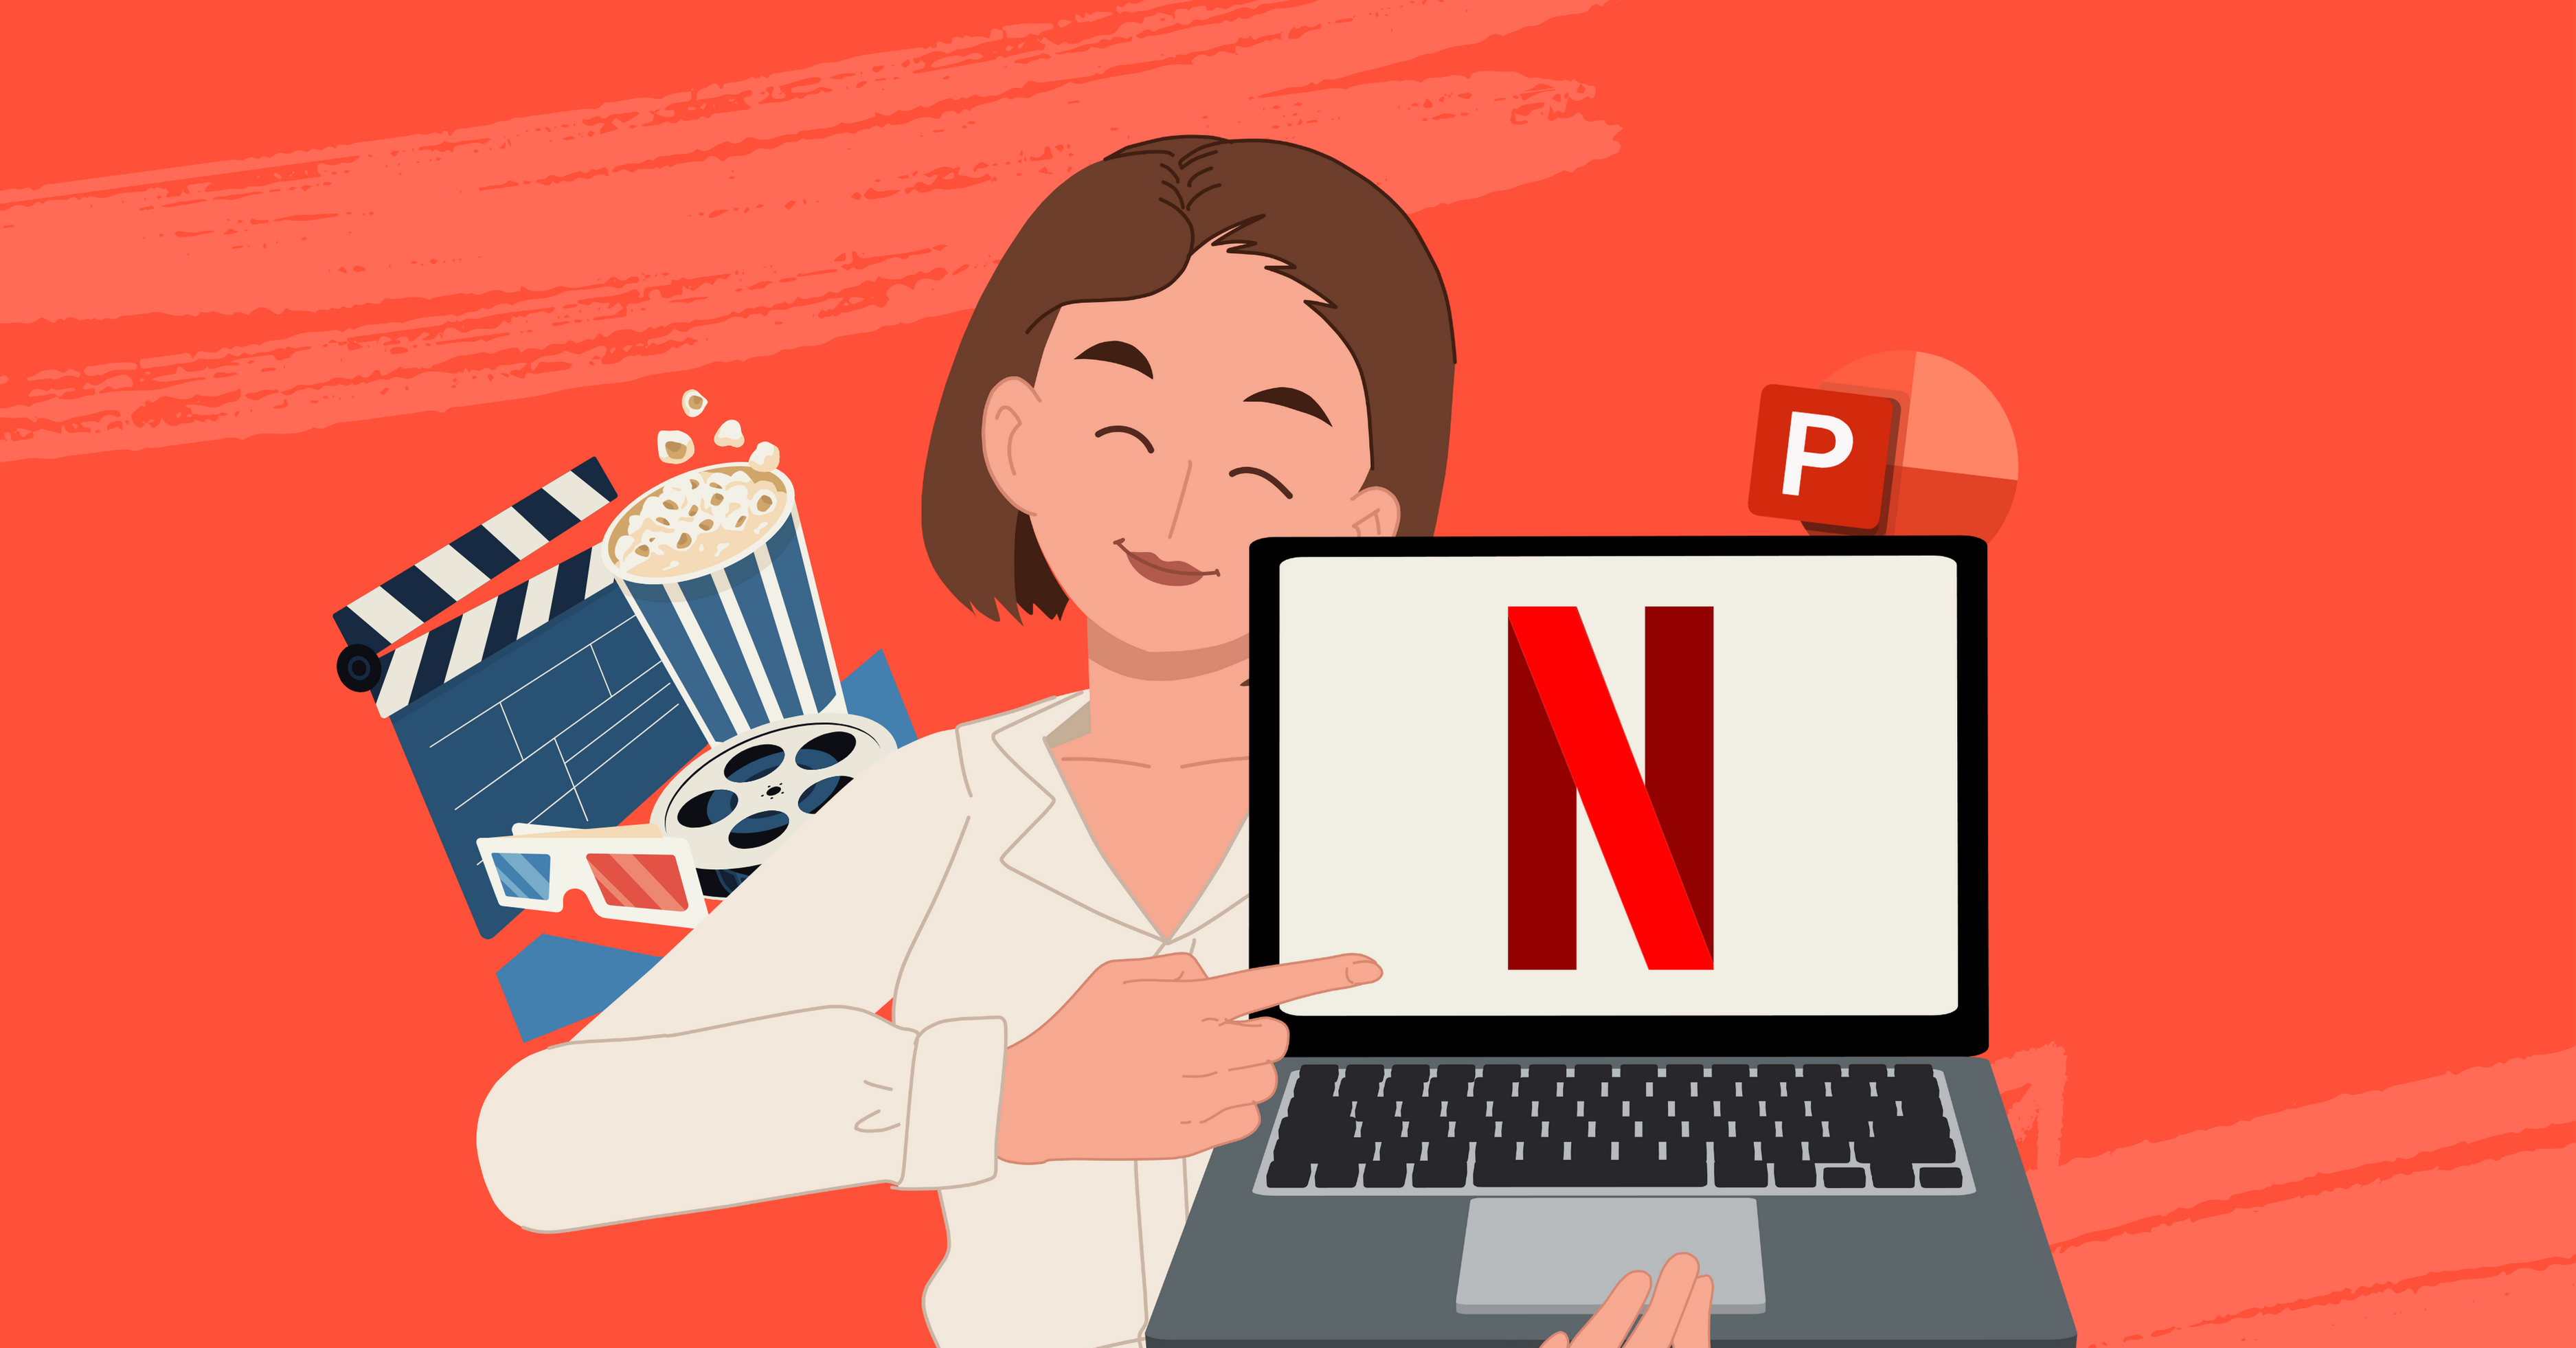 Cool Netflix PowerPoint Template for Download (+7 Practical Tips on Themed Presentation Design)